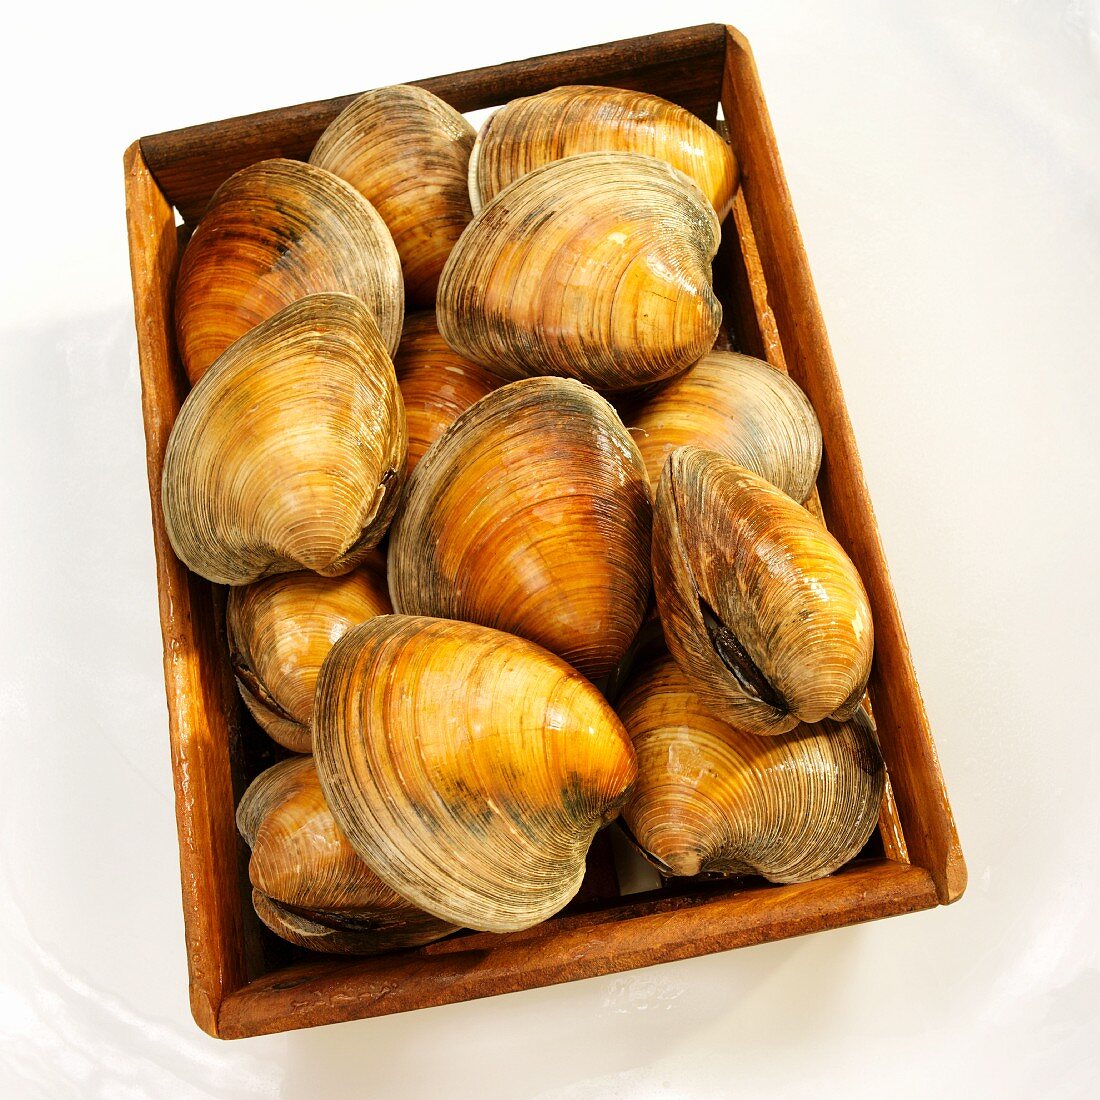 Crate of Big Neck Clams; From Above